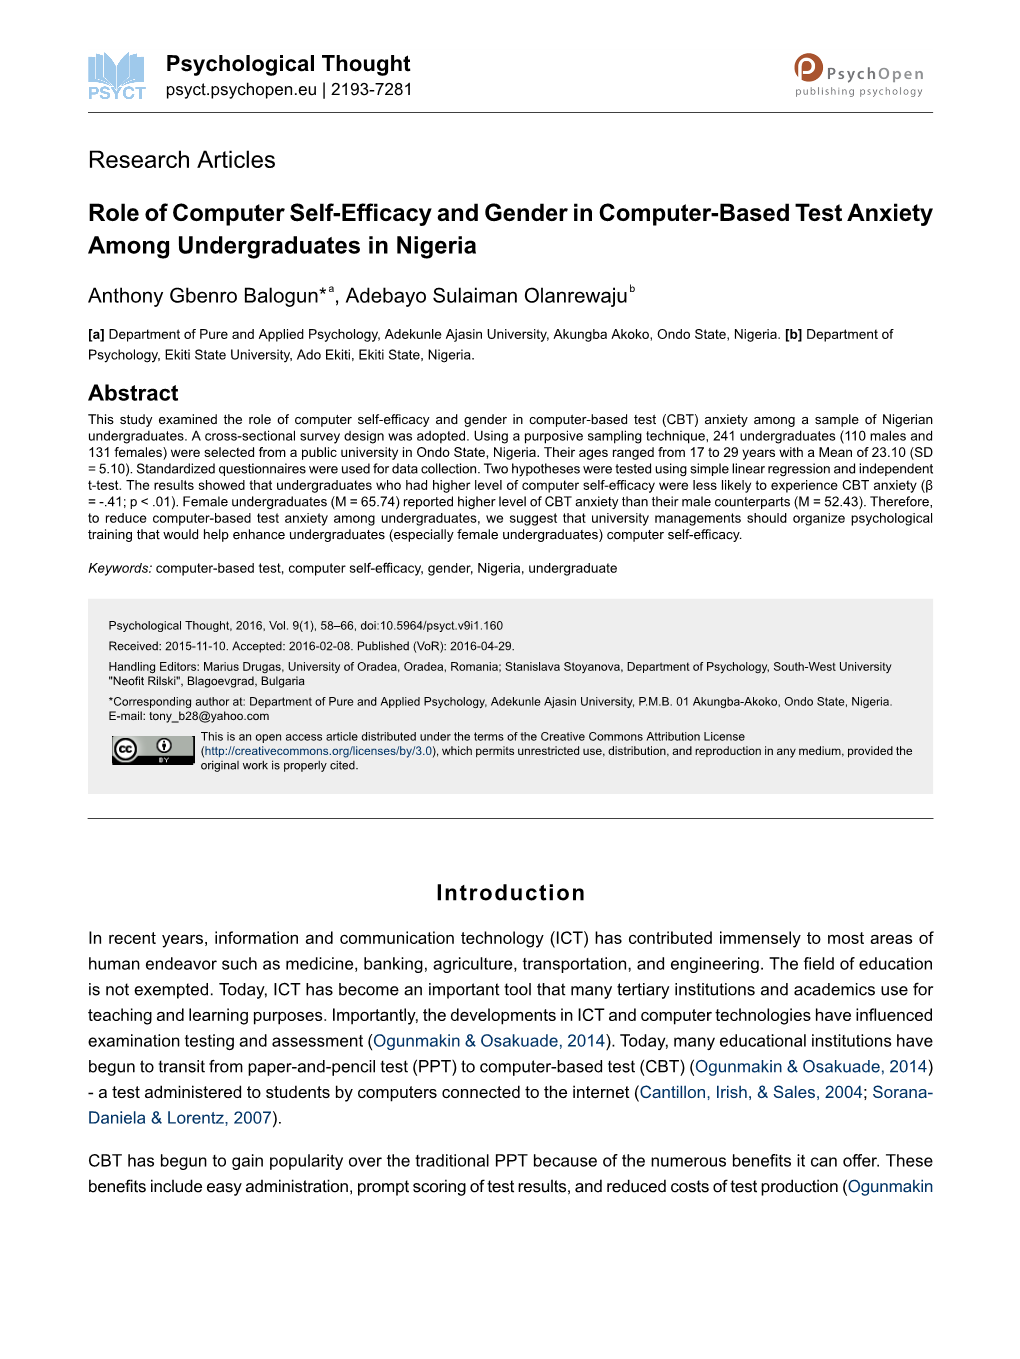 Role of Computer Self-Efficacy and Gender in Computer-Based Test Anxiety Among Undergraduates in Nigeria